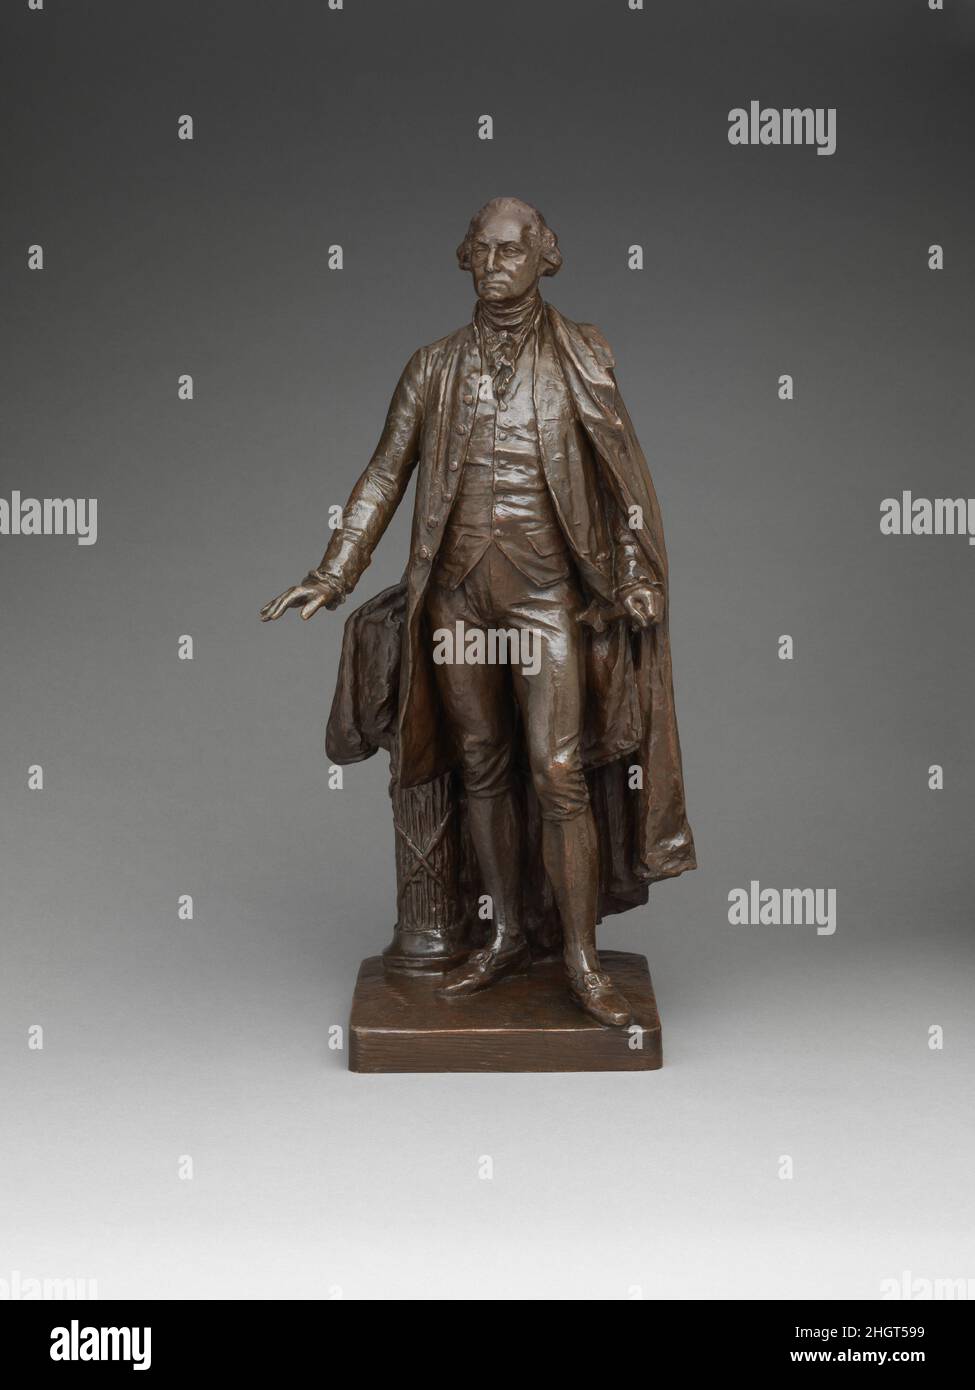 George Washington 1882; cast ca. 1911 John Quincy Adams Ward American This statuette was cast after the final sketch model for Ward’s monumental statue of George Washington (1732–1799), erected on the front steps of the old Sub-Treasury Building (now Federal Hall) at Wall and Broad Streets in New York City. The monument stands where Washington took his oath of office as the first president of the United States in 1789. Here, Washington is shown right after being sworn in, his right hand extended to the spot where the Bible would have been.. George Washington. John Quincy Adams Ward (American, Stock Photo